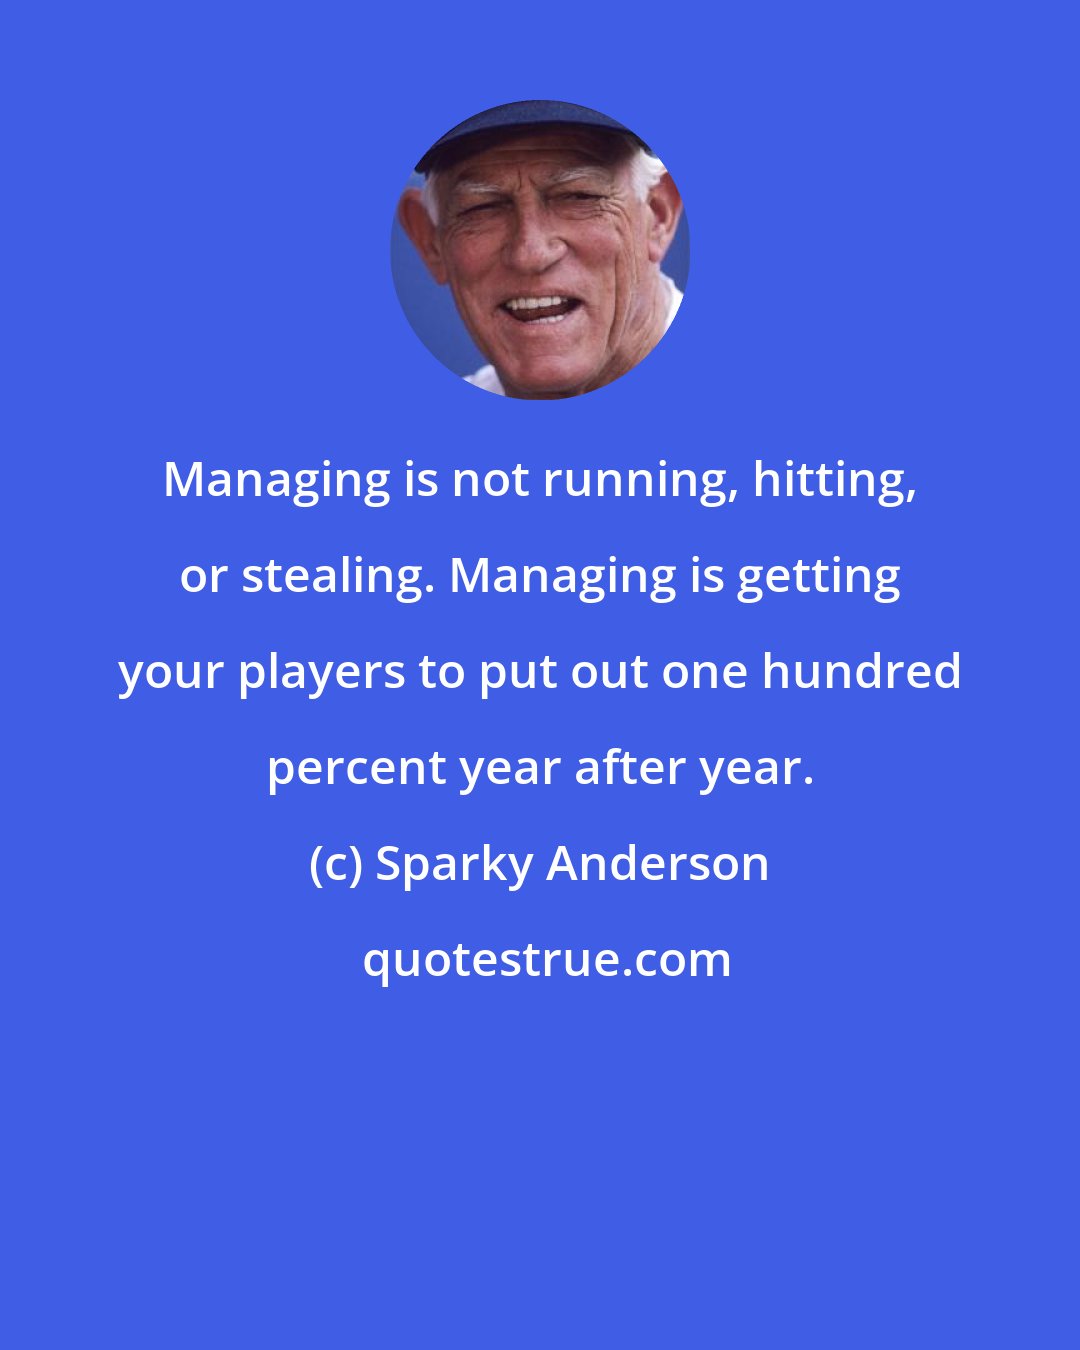 Sparky Anderson: Managing is not running, hitting, or stealing. Managing is getting your players to put out one hundred percent year after year.